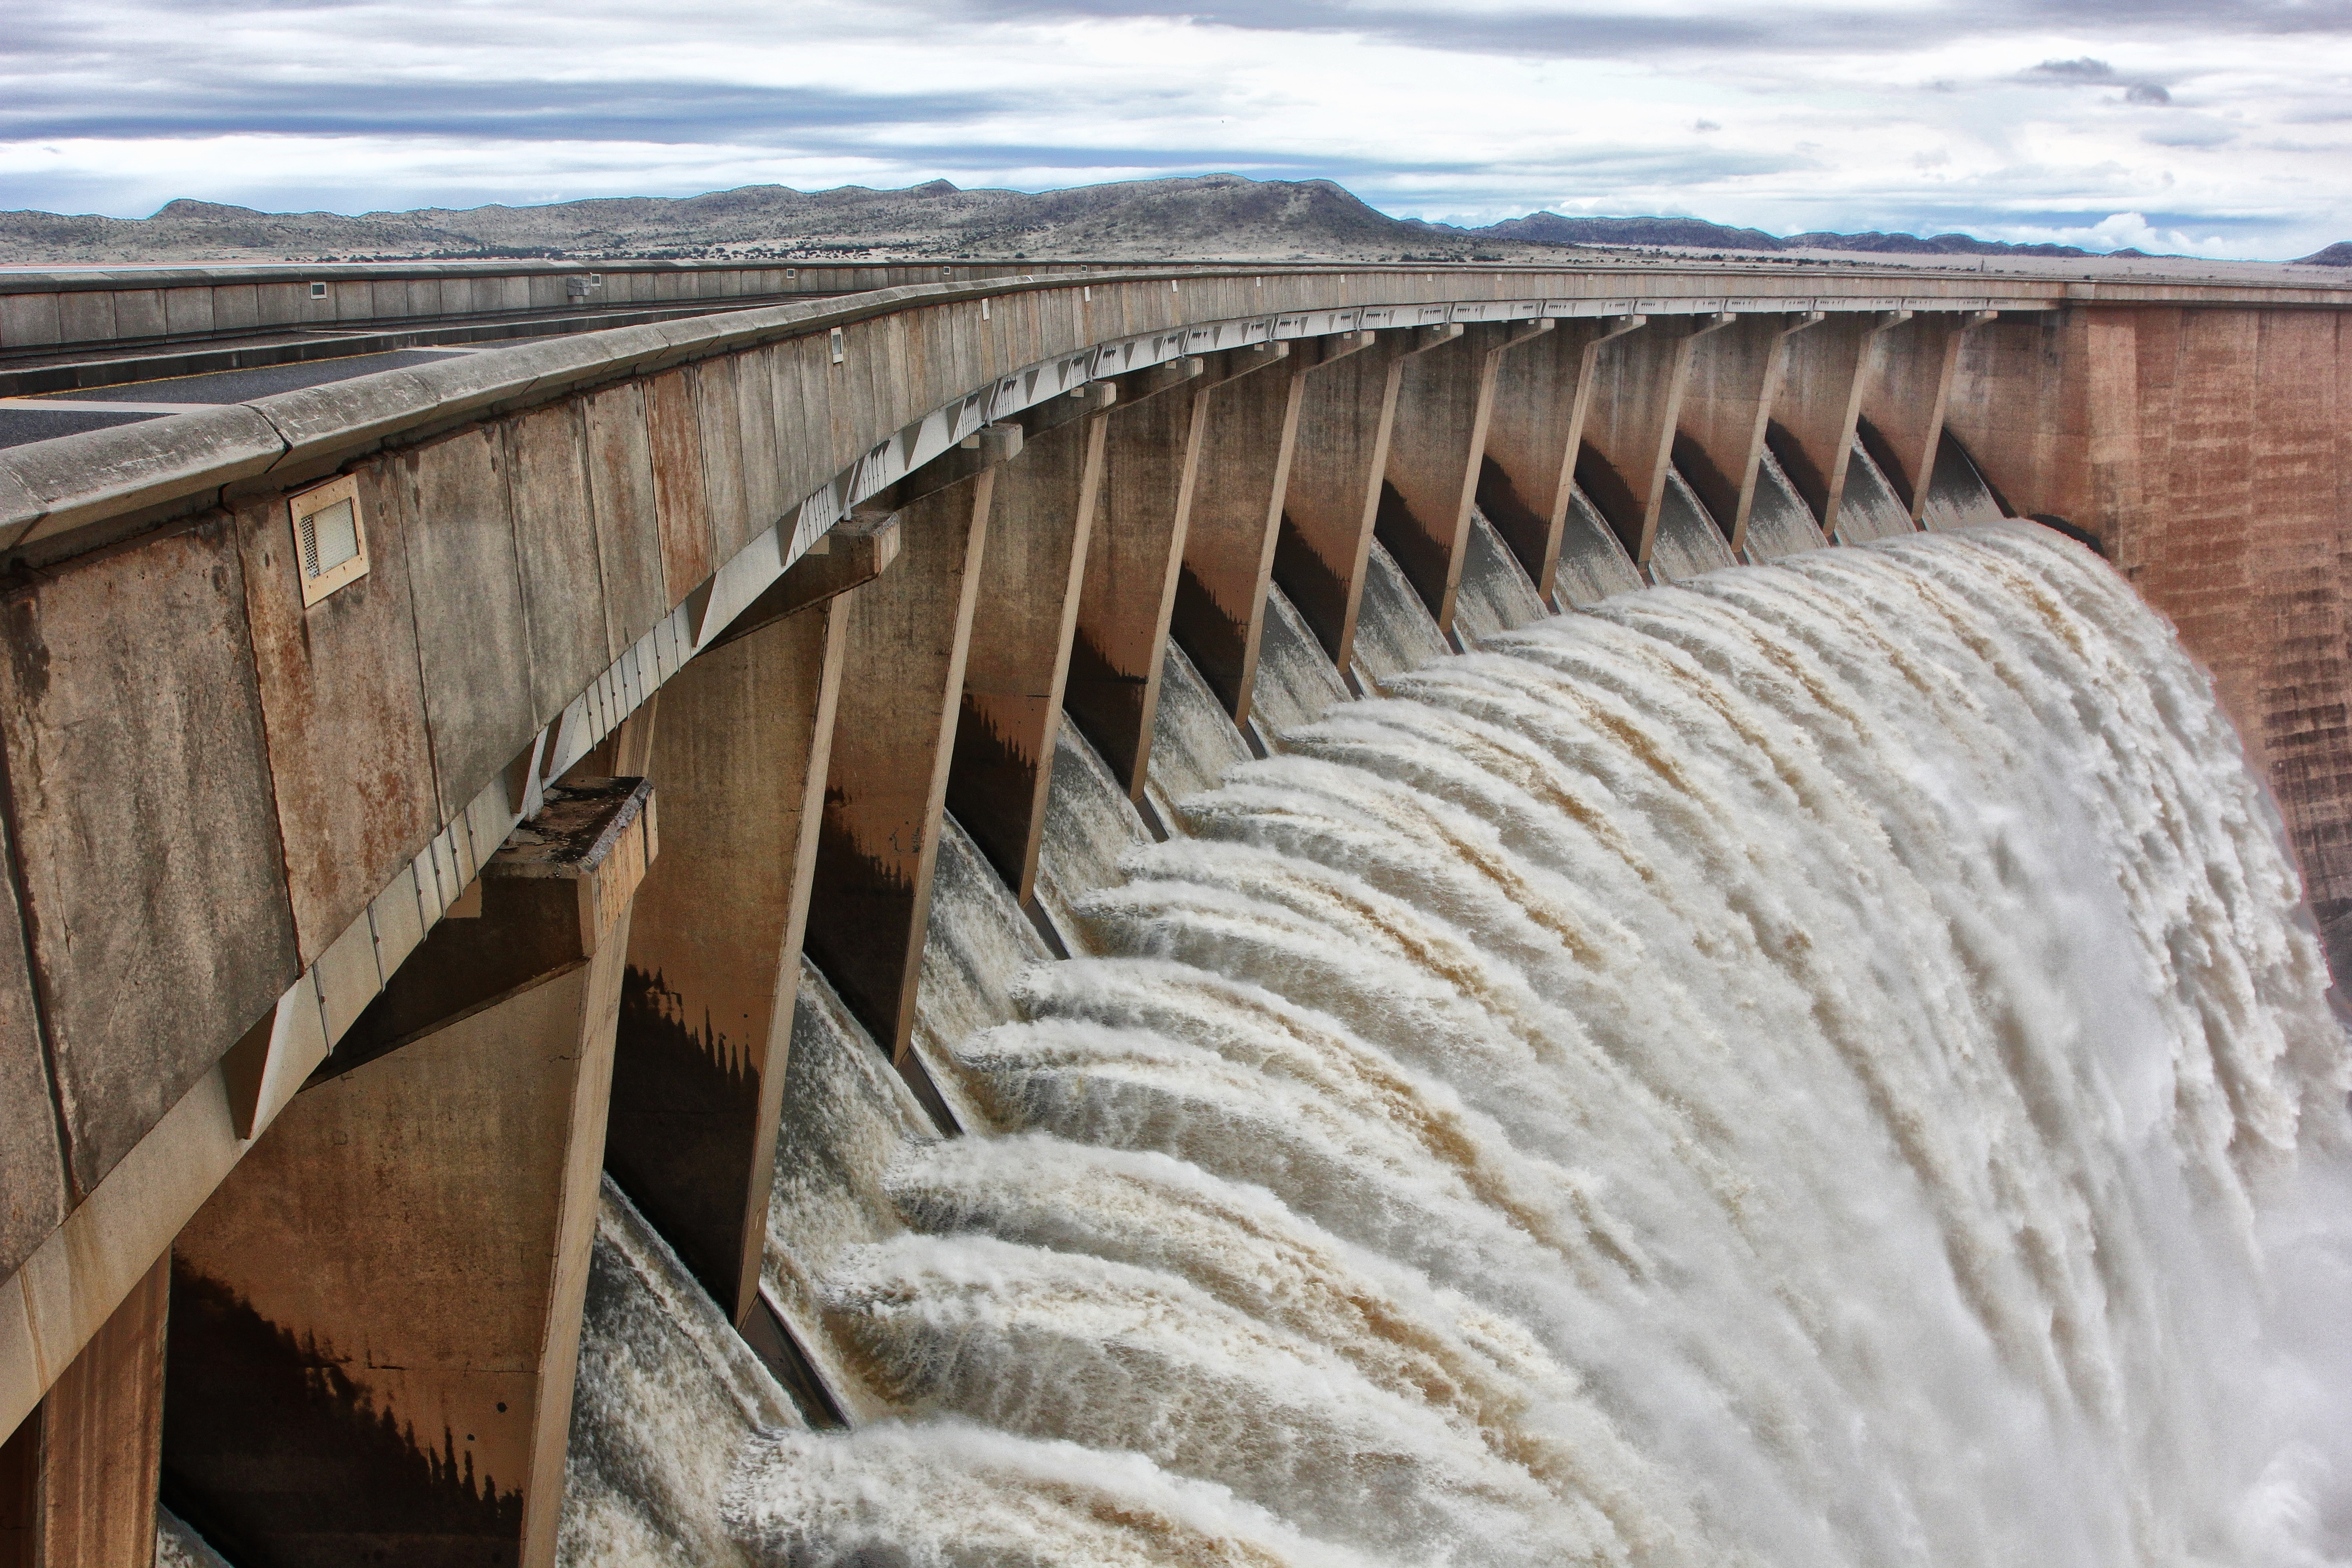 When the dam overflows, the spillway looks spectacular, attracting ‘water tourists’ from all over the country. Image: Chris Marais